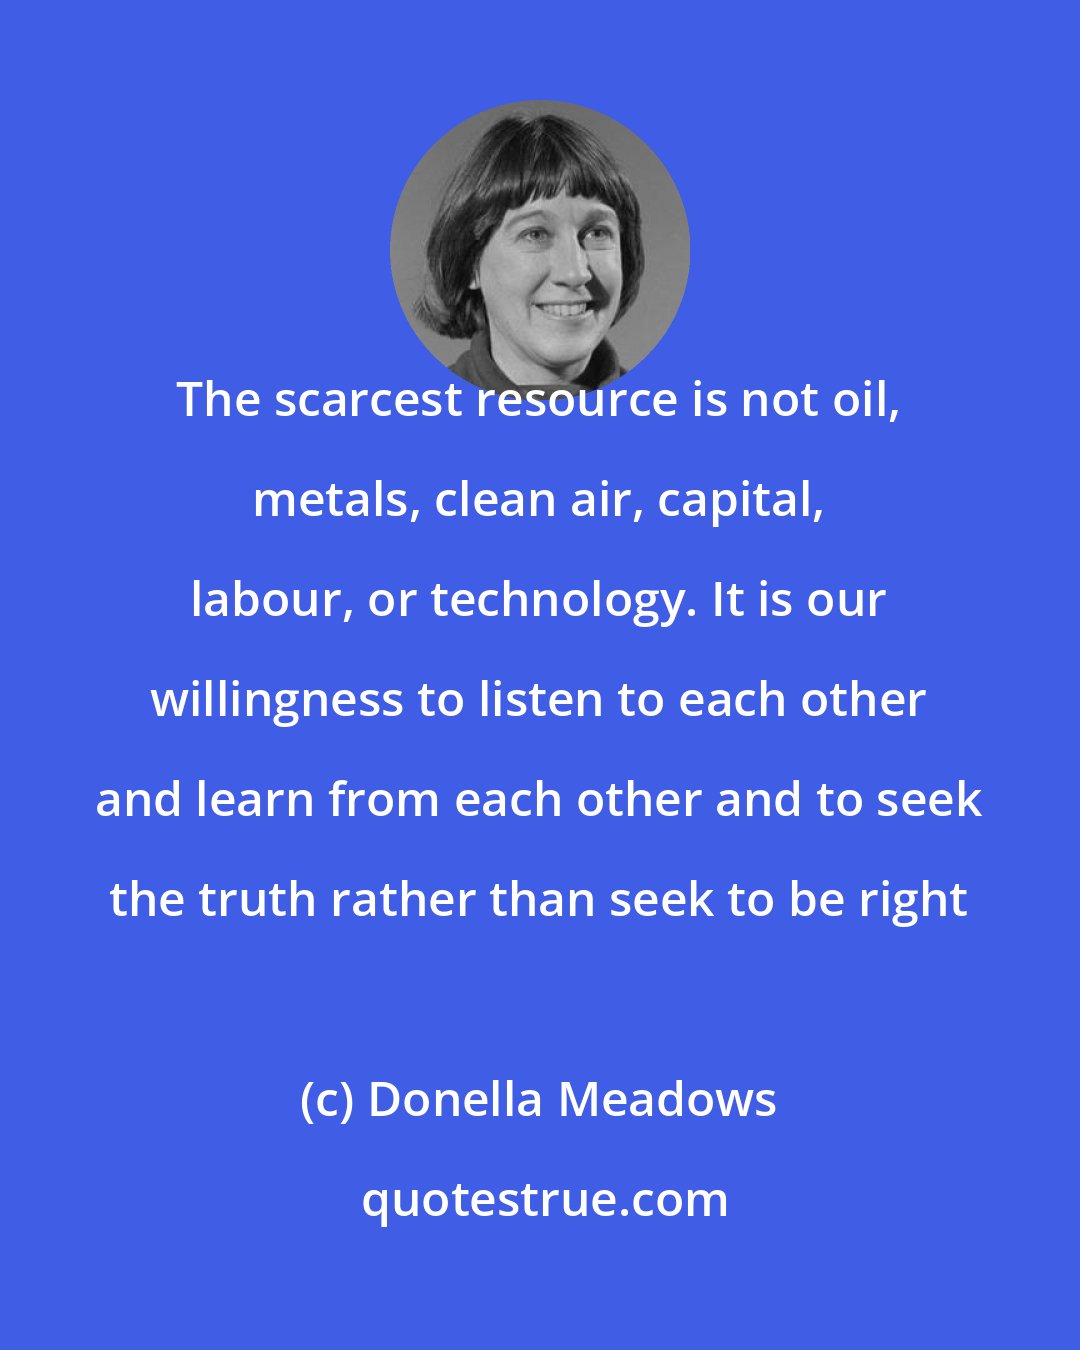 Donella Meadows: The scarcest resource is not oil, metals, clean air, capital, labour, or technology. It is our willingness to listen to each other and learn from each other and to seek the truth rather than seek to be right